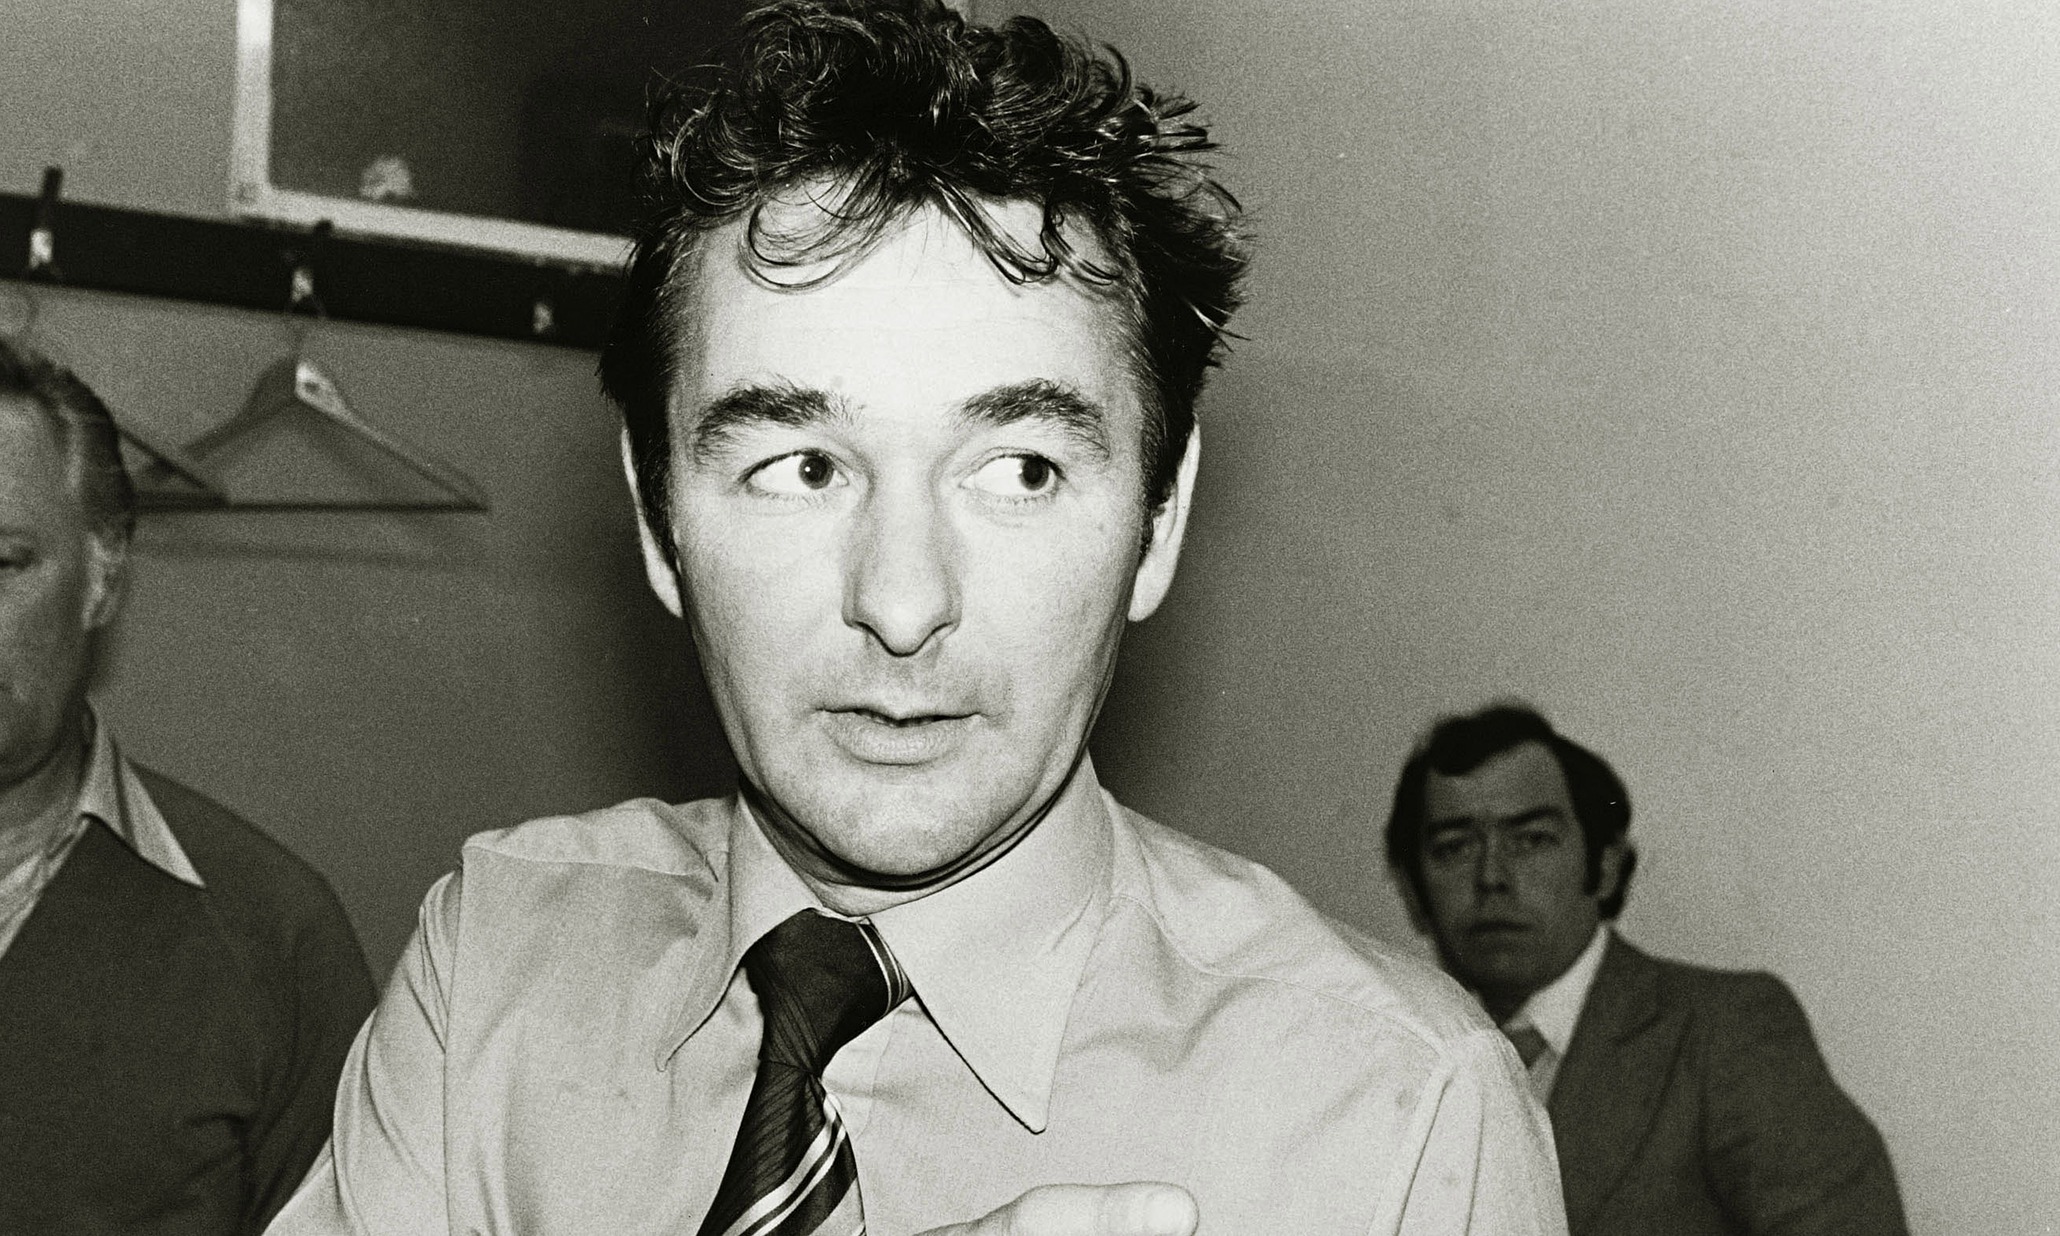 Brian Clough and the art of doing it your own way